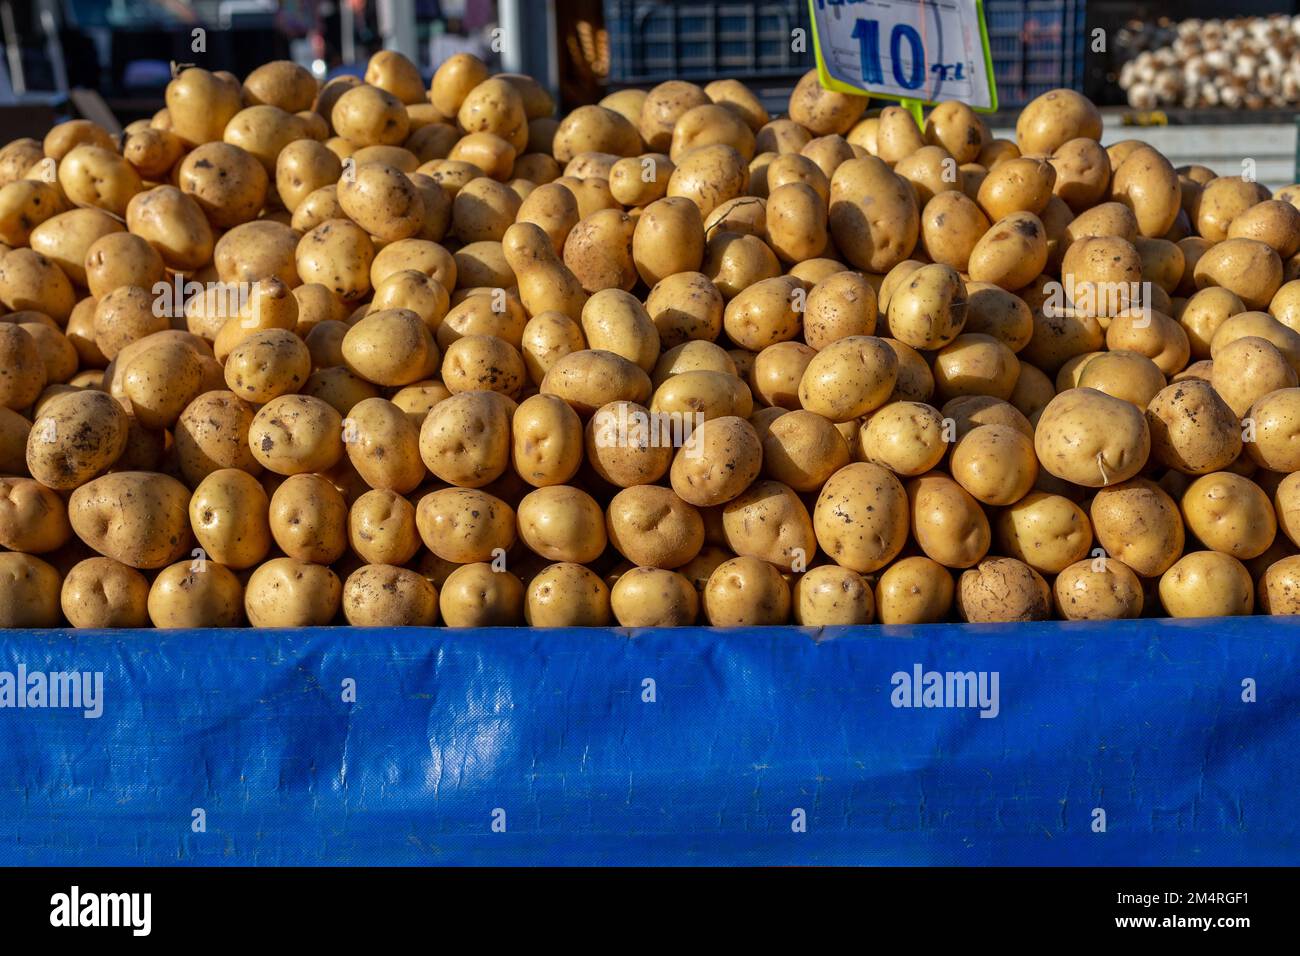 Potatoes sold in the public market in Turkey. French fries. Stock Photo